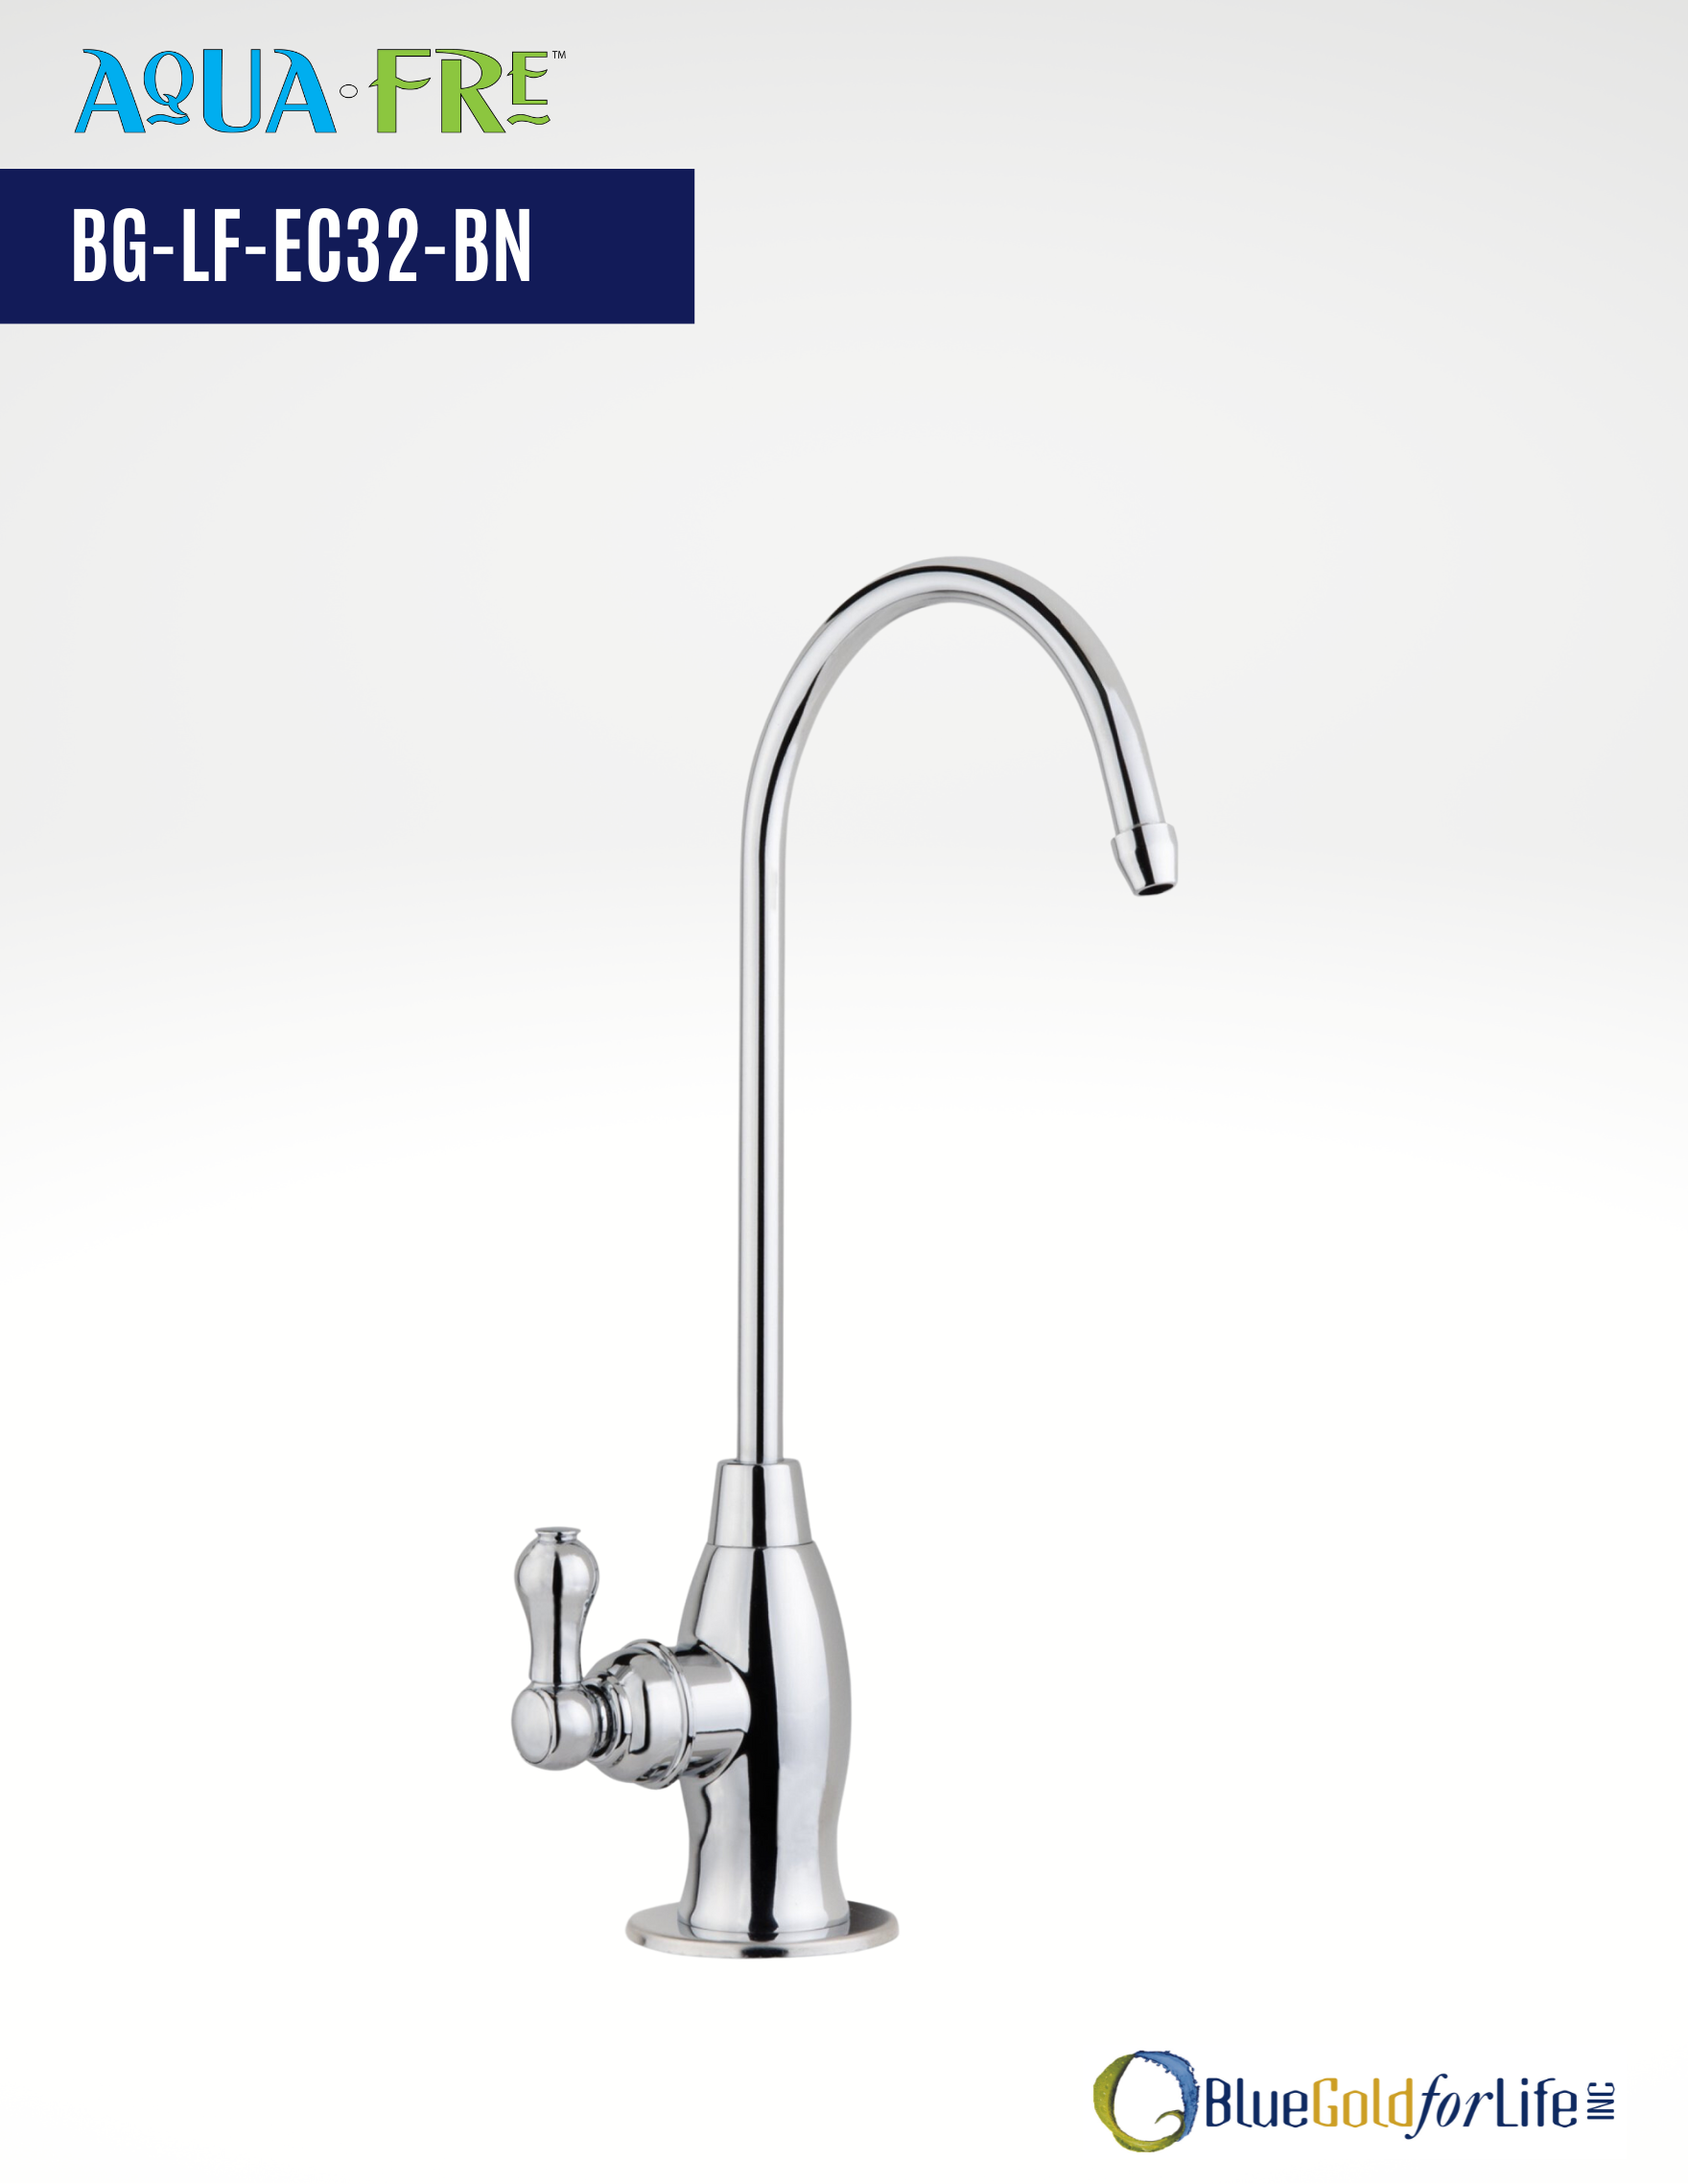 Goose-Neck High Spout Cold Water Kitchen Drinking Faucet - Brushed Nickel